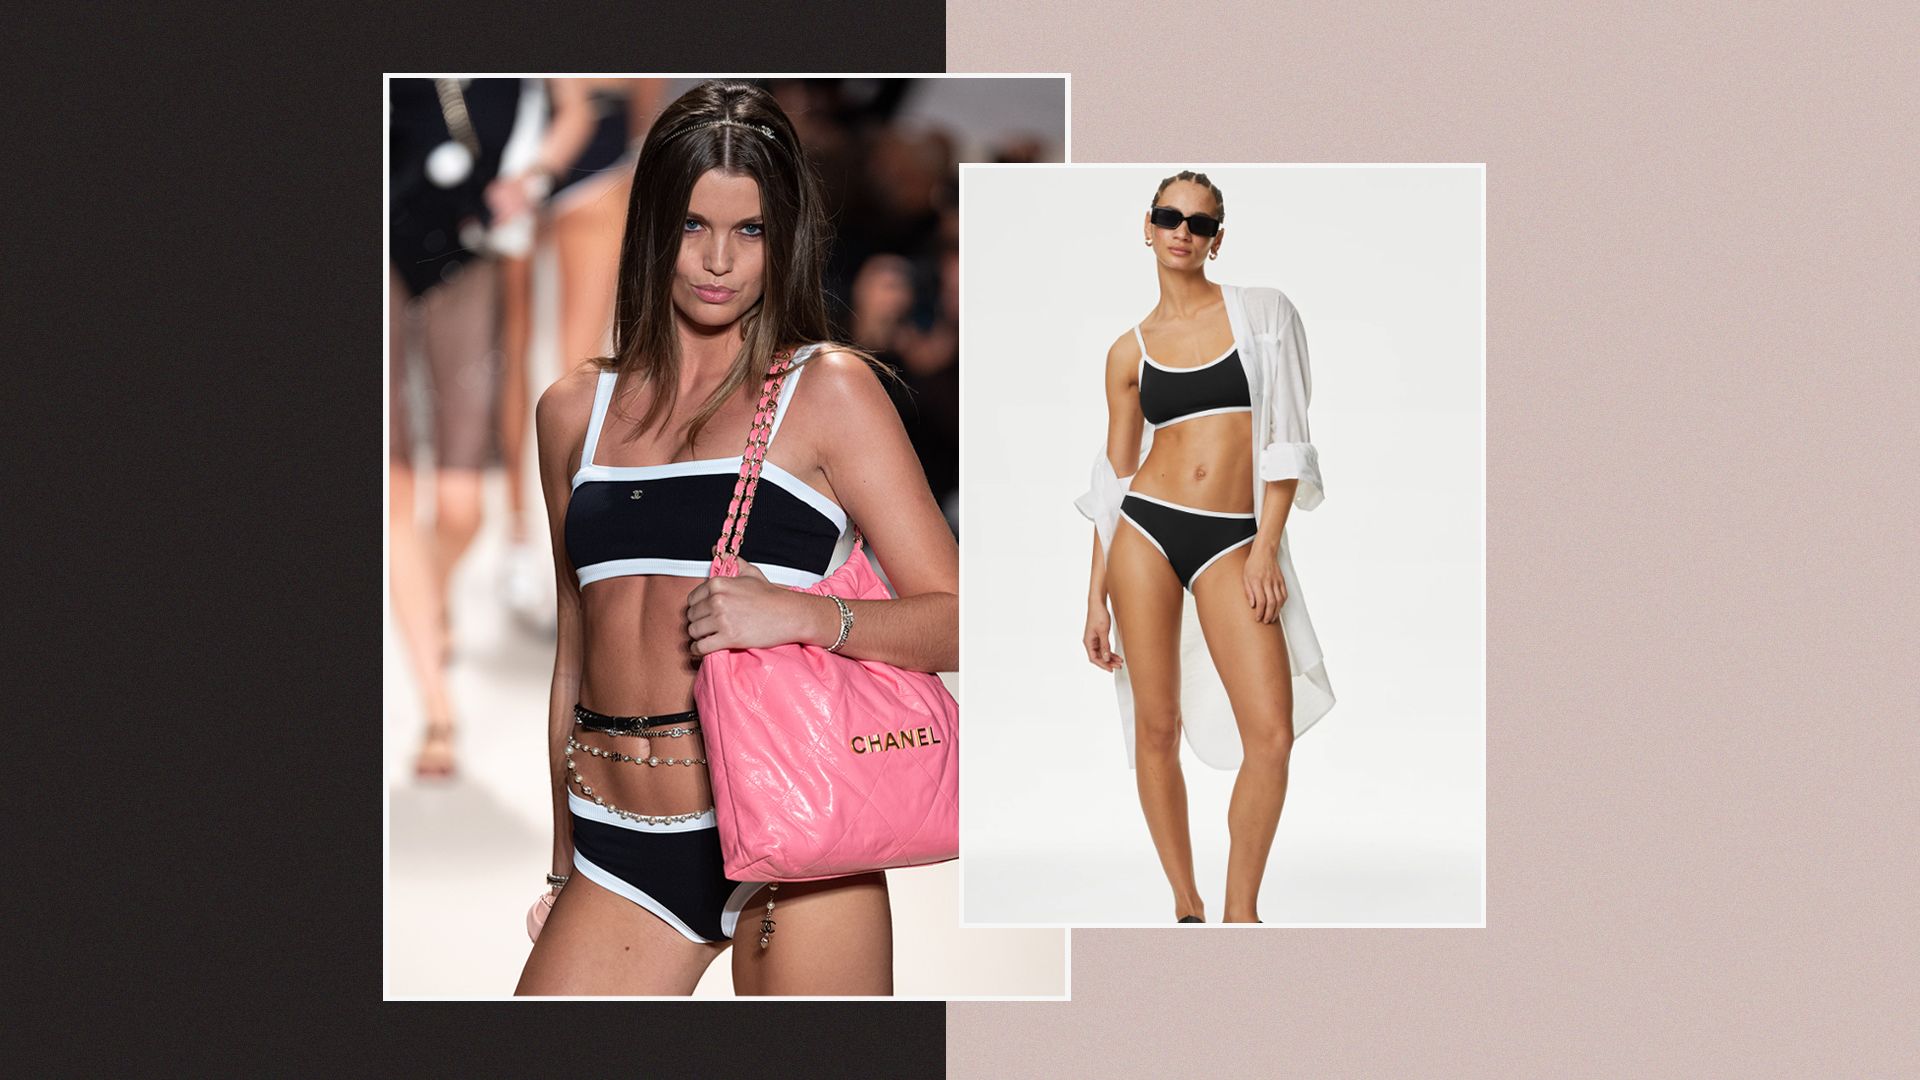 M&S's new £30 black & white bikini will have Chanel fans rushing to buy